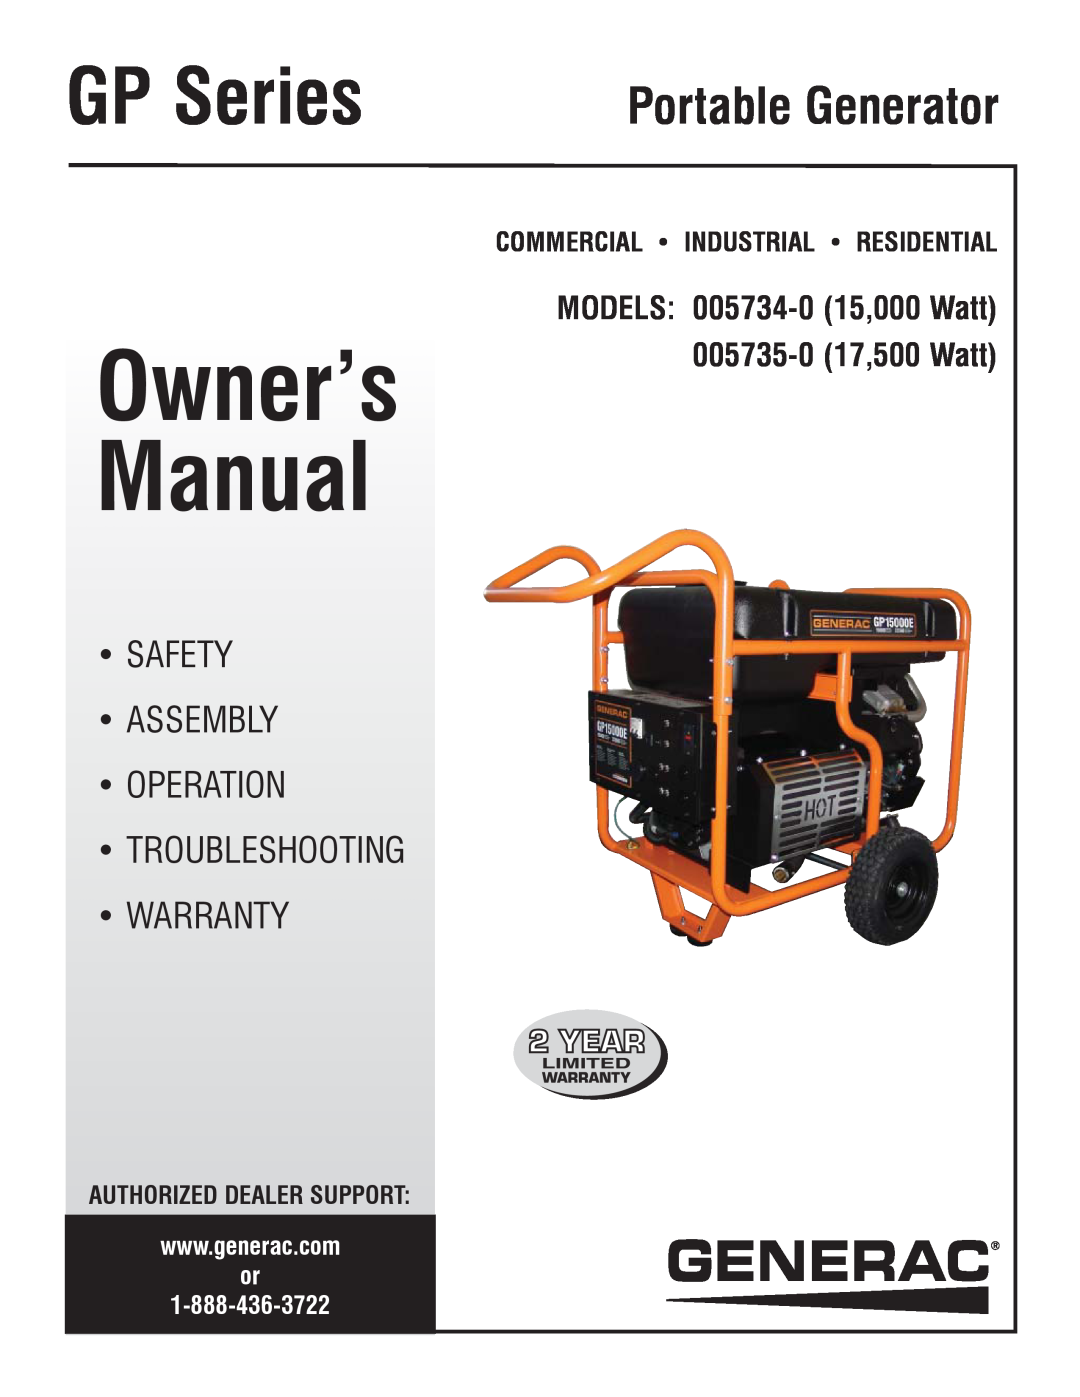 Sears 005734-0 manual Commercial Industrial Residential, Authorized Dealer Support, GP Series, Portable Generator 